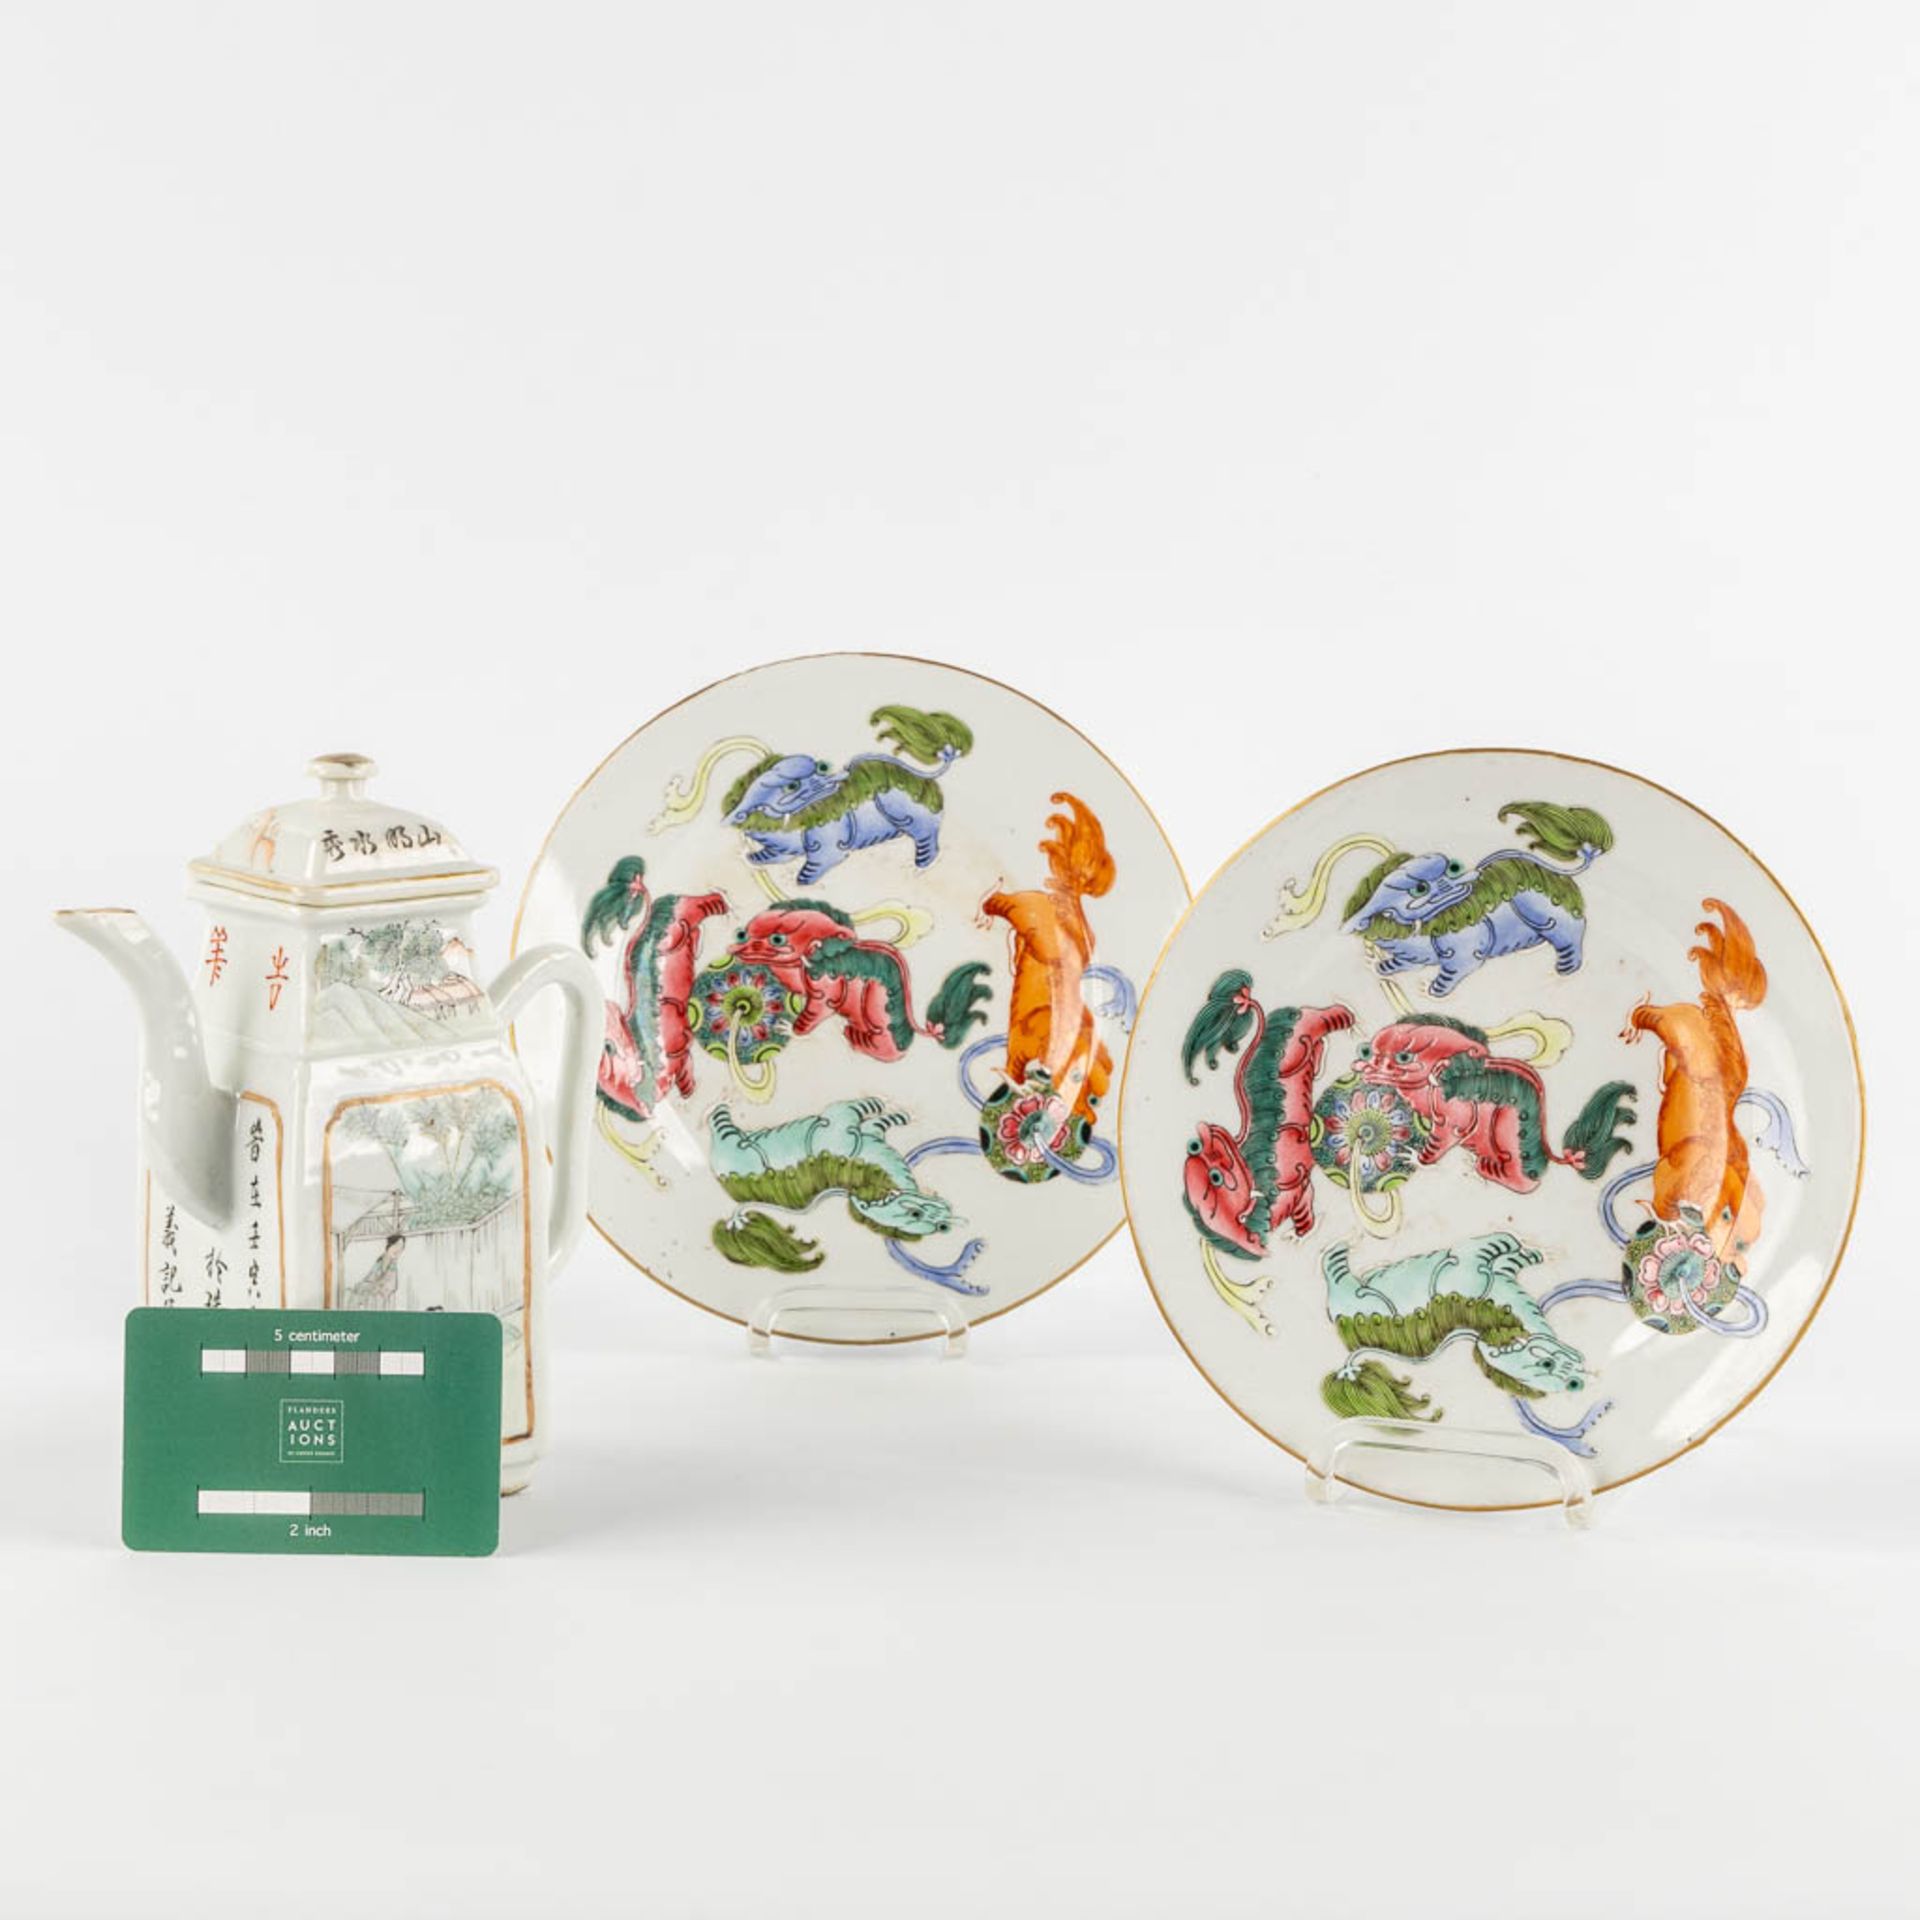 A Chinese pair of plates and a teapot. Decorated with Foo Lions and Figurines. (H:18 cm) - Image 2 of 15